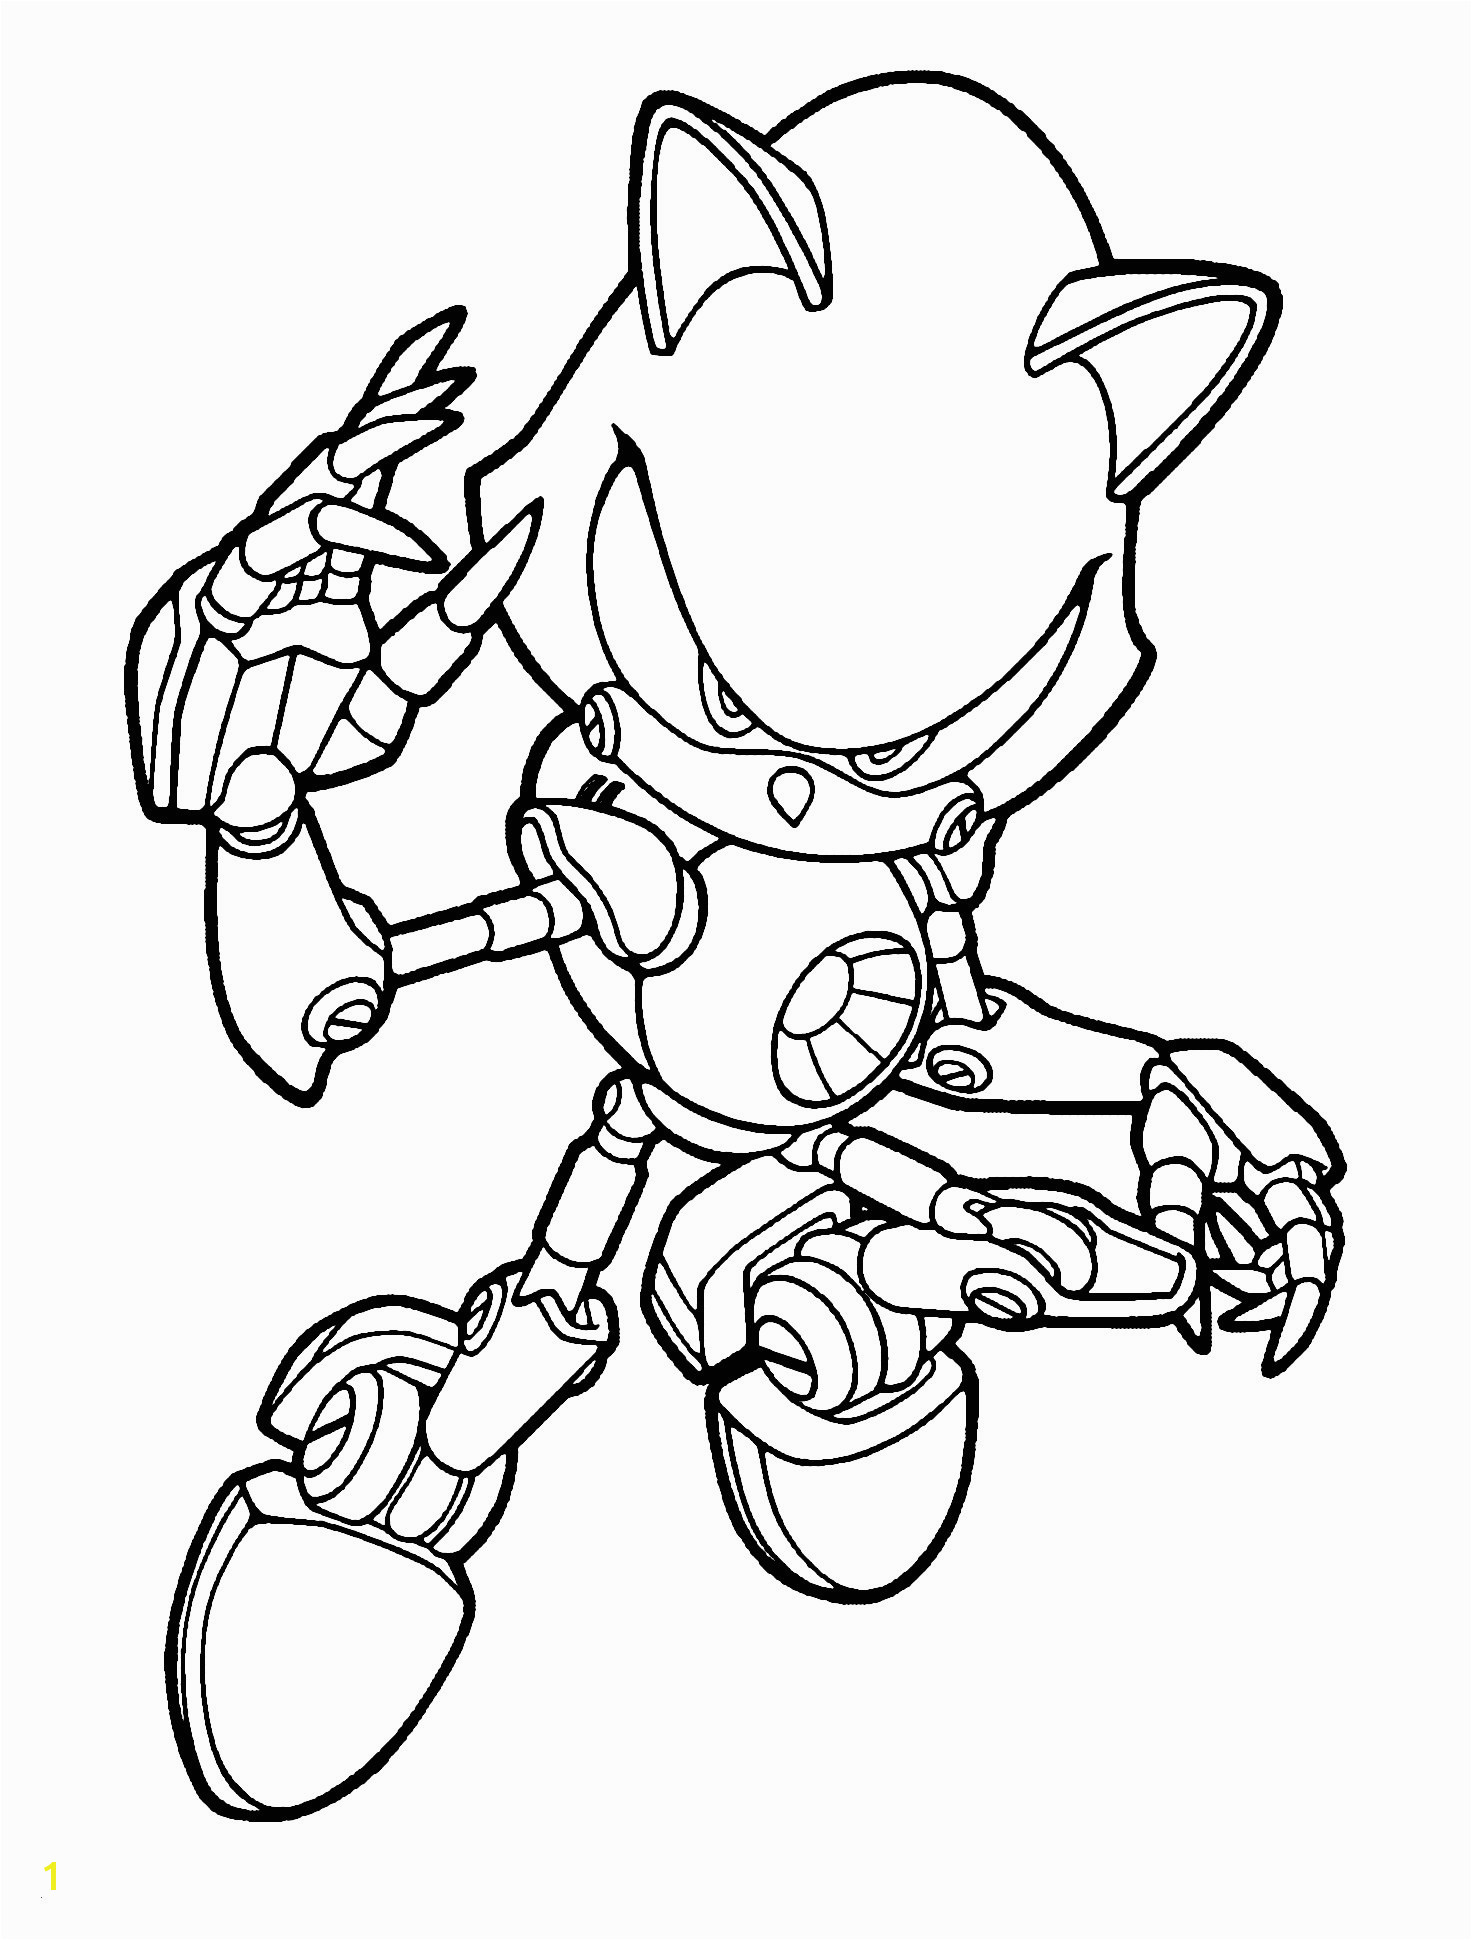 Dark sonic the Hedgehog Coloring Pages sonic the Hedgehog Ausmalbilder Best sonic Coloring Pages New